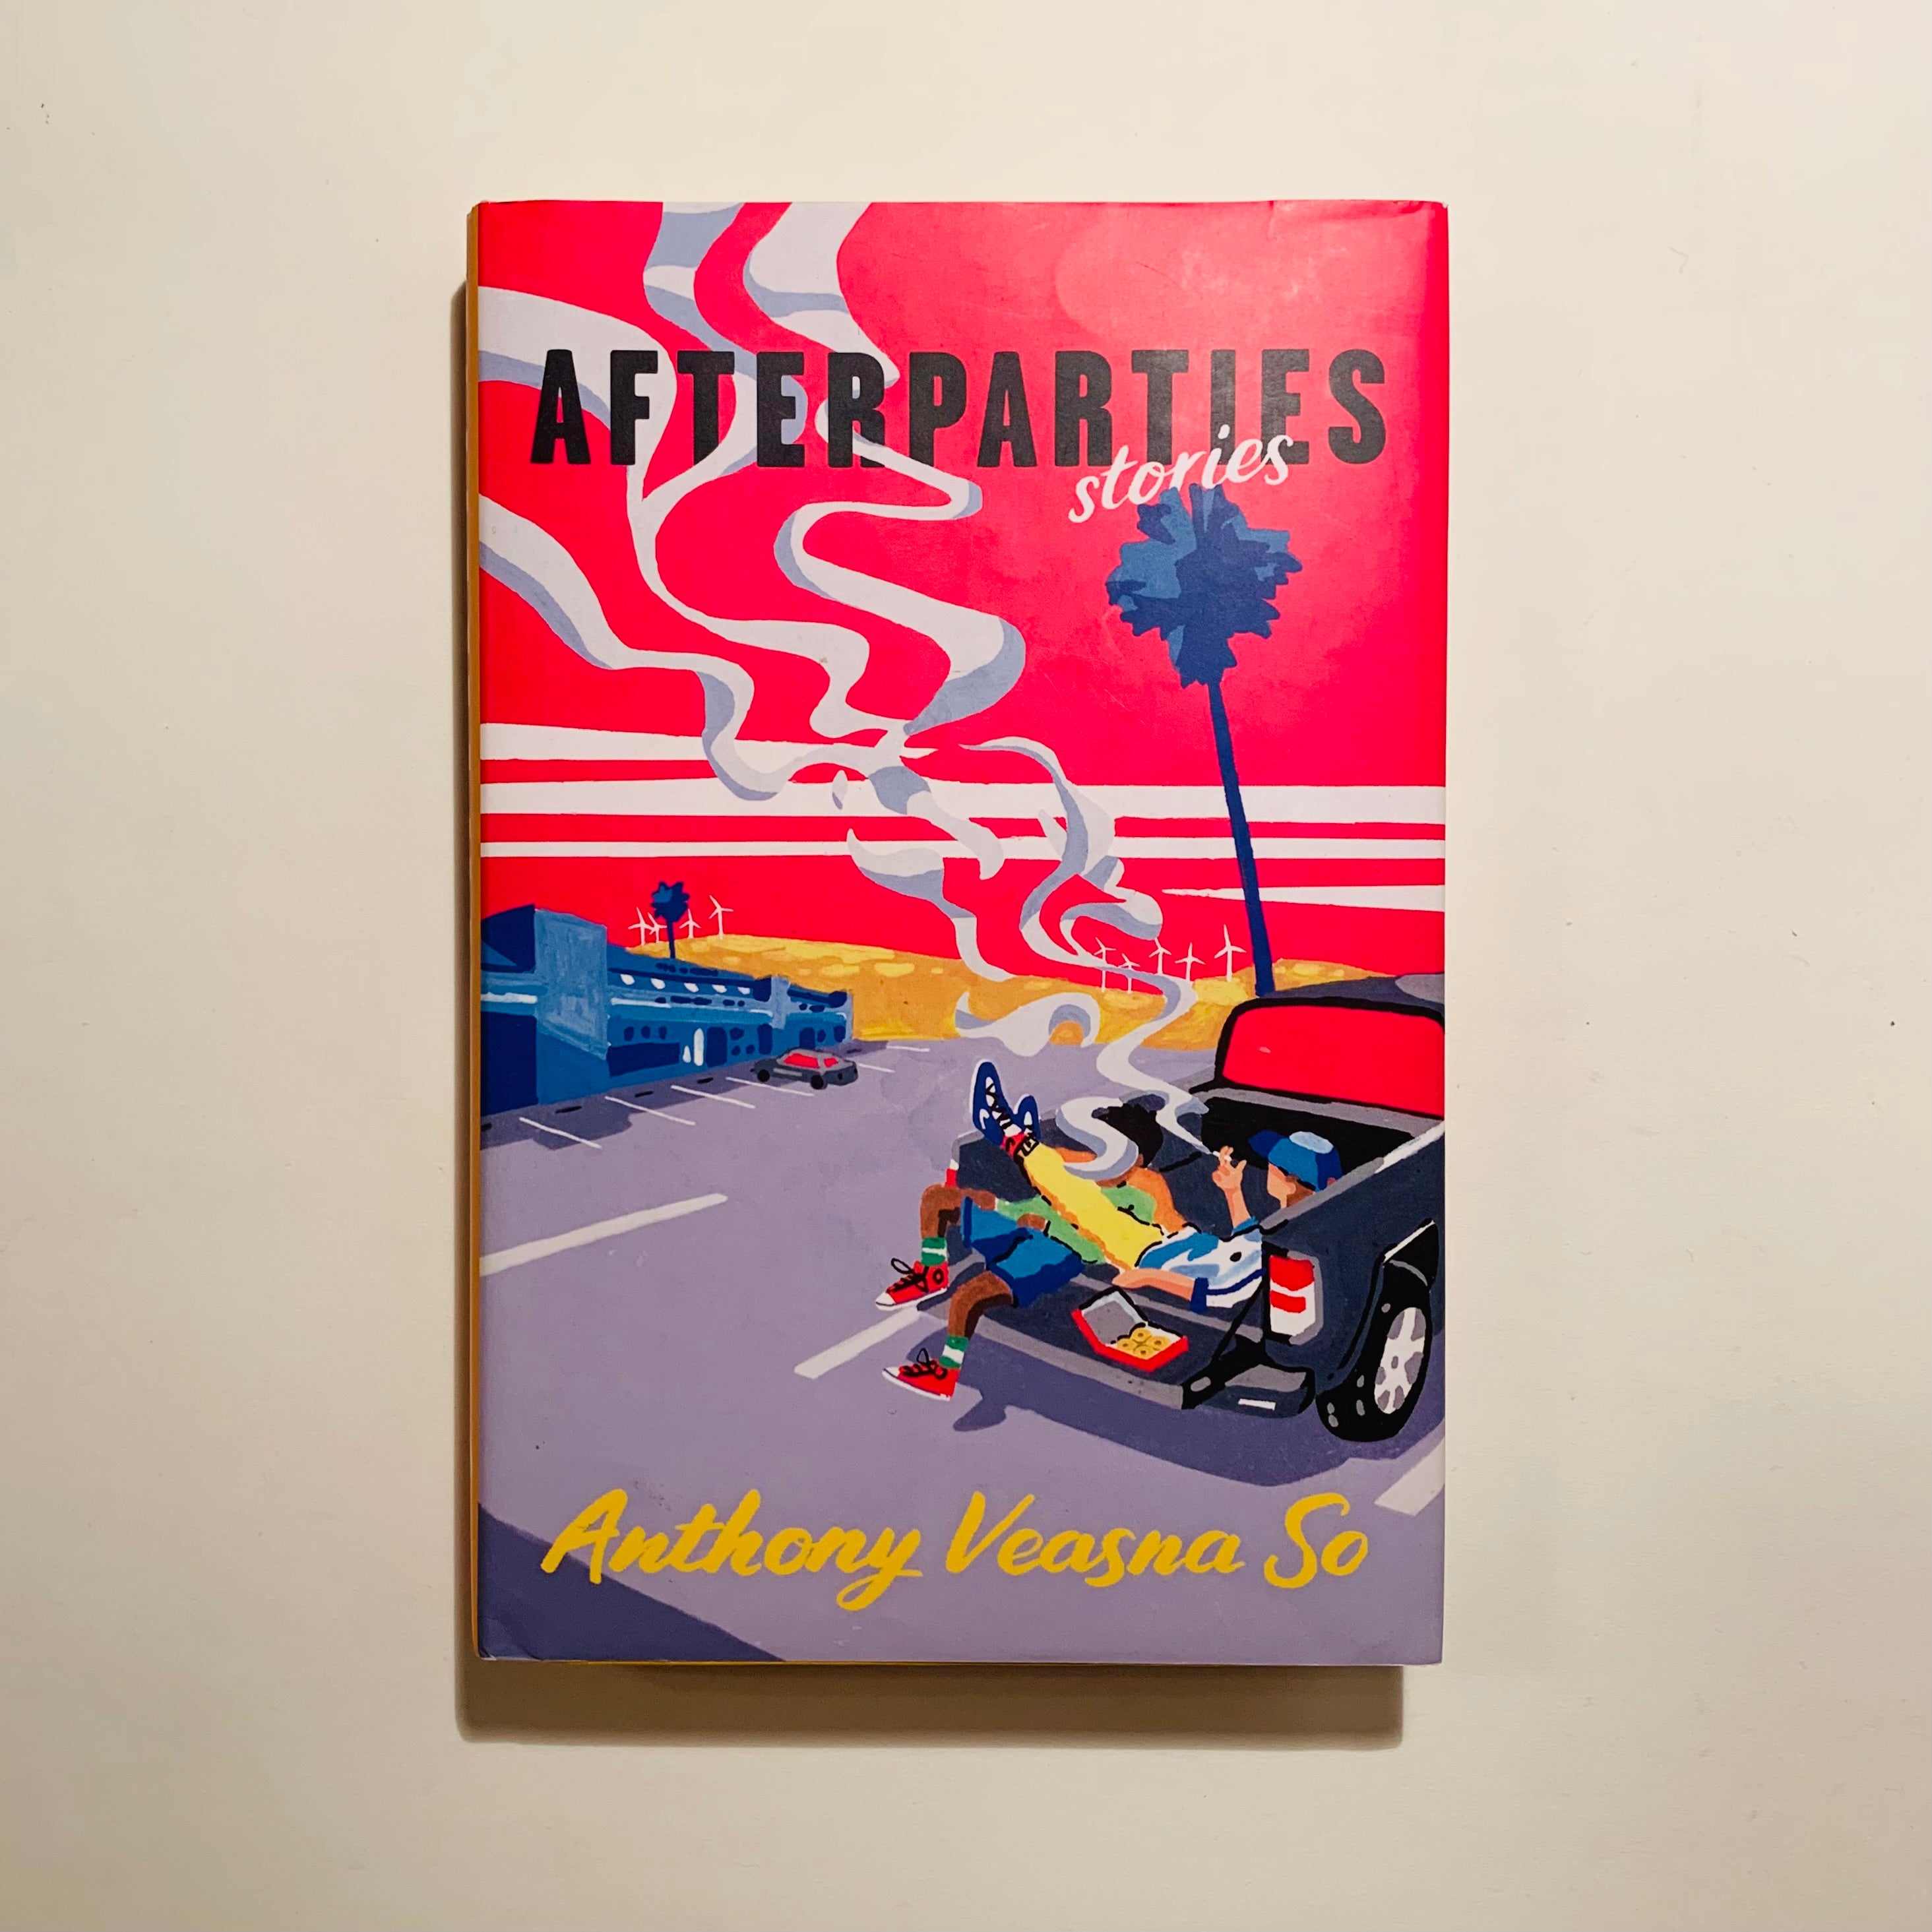 Afterparties (stories) Anthony Veasna So – Brown Bag Books